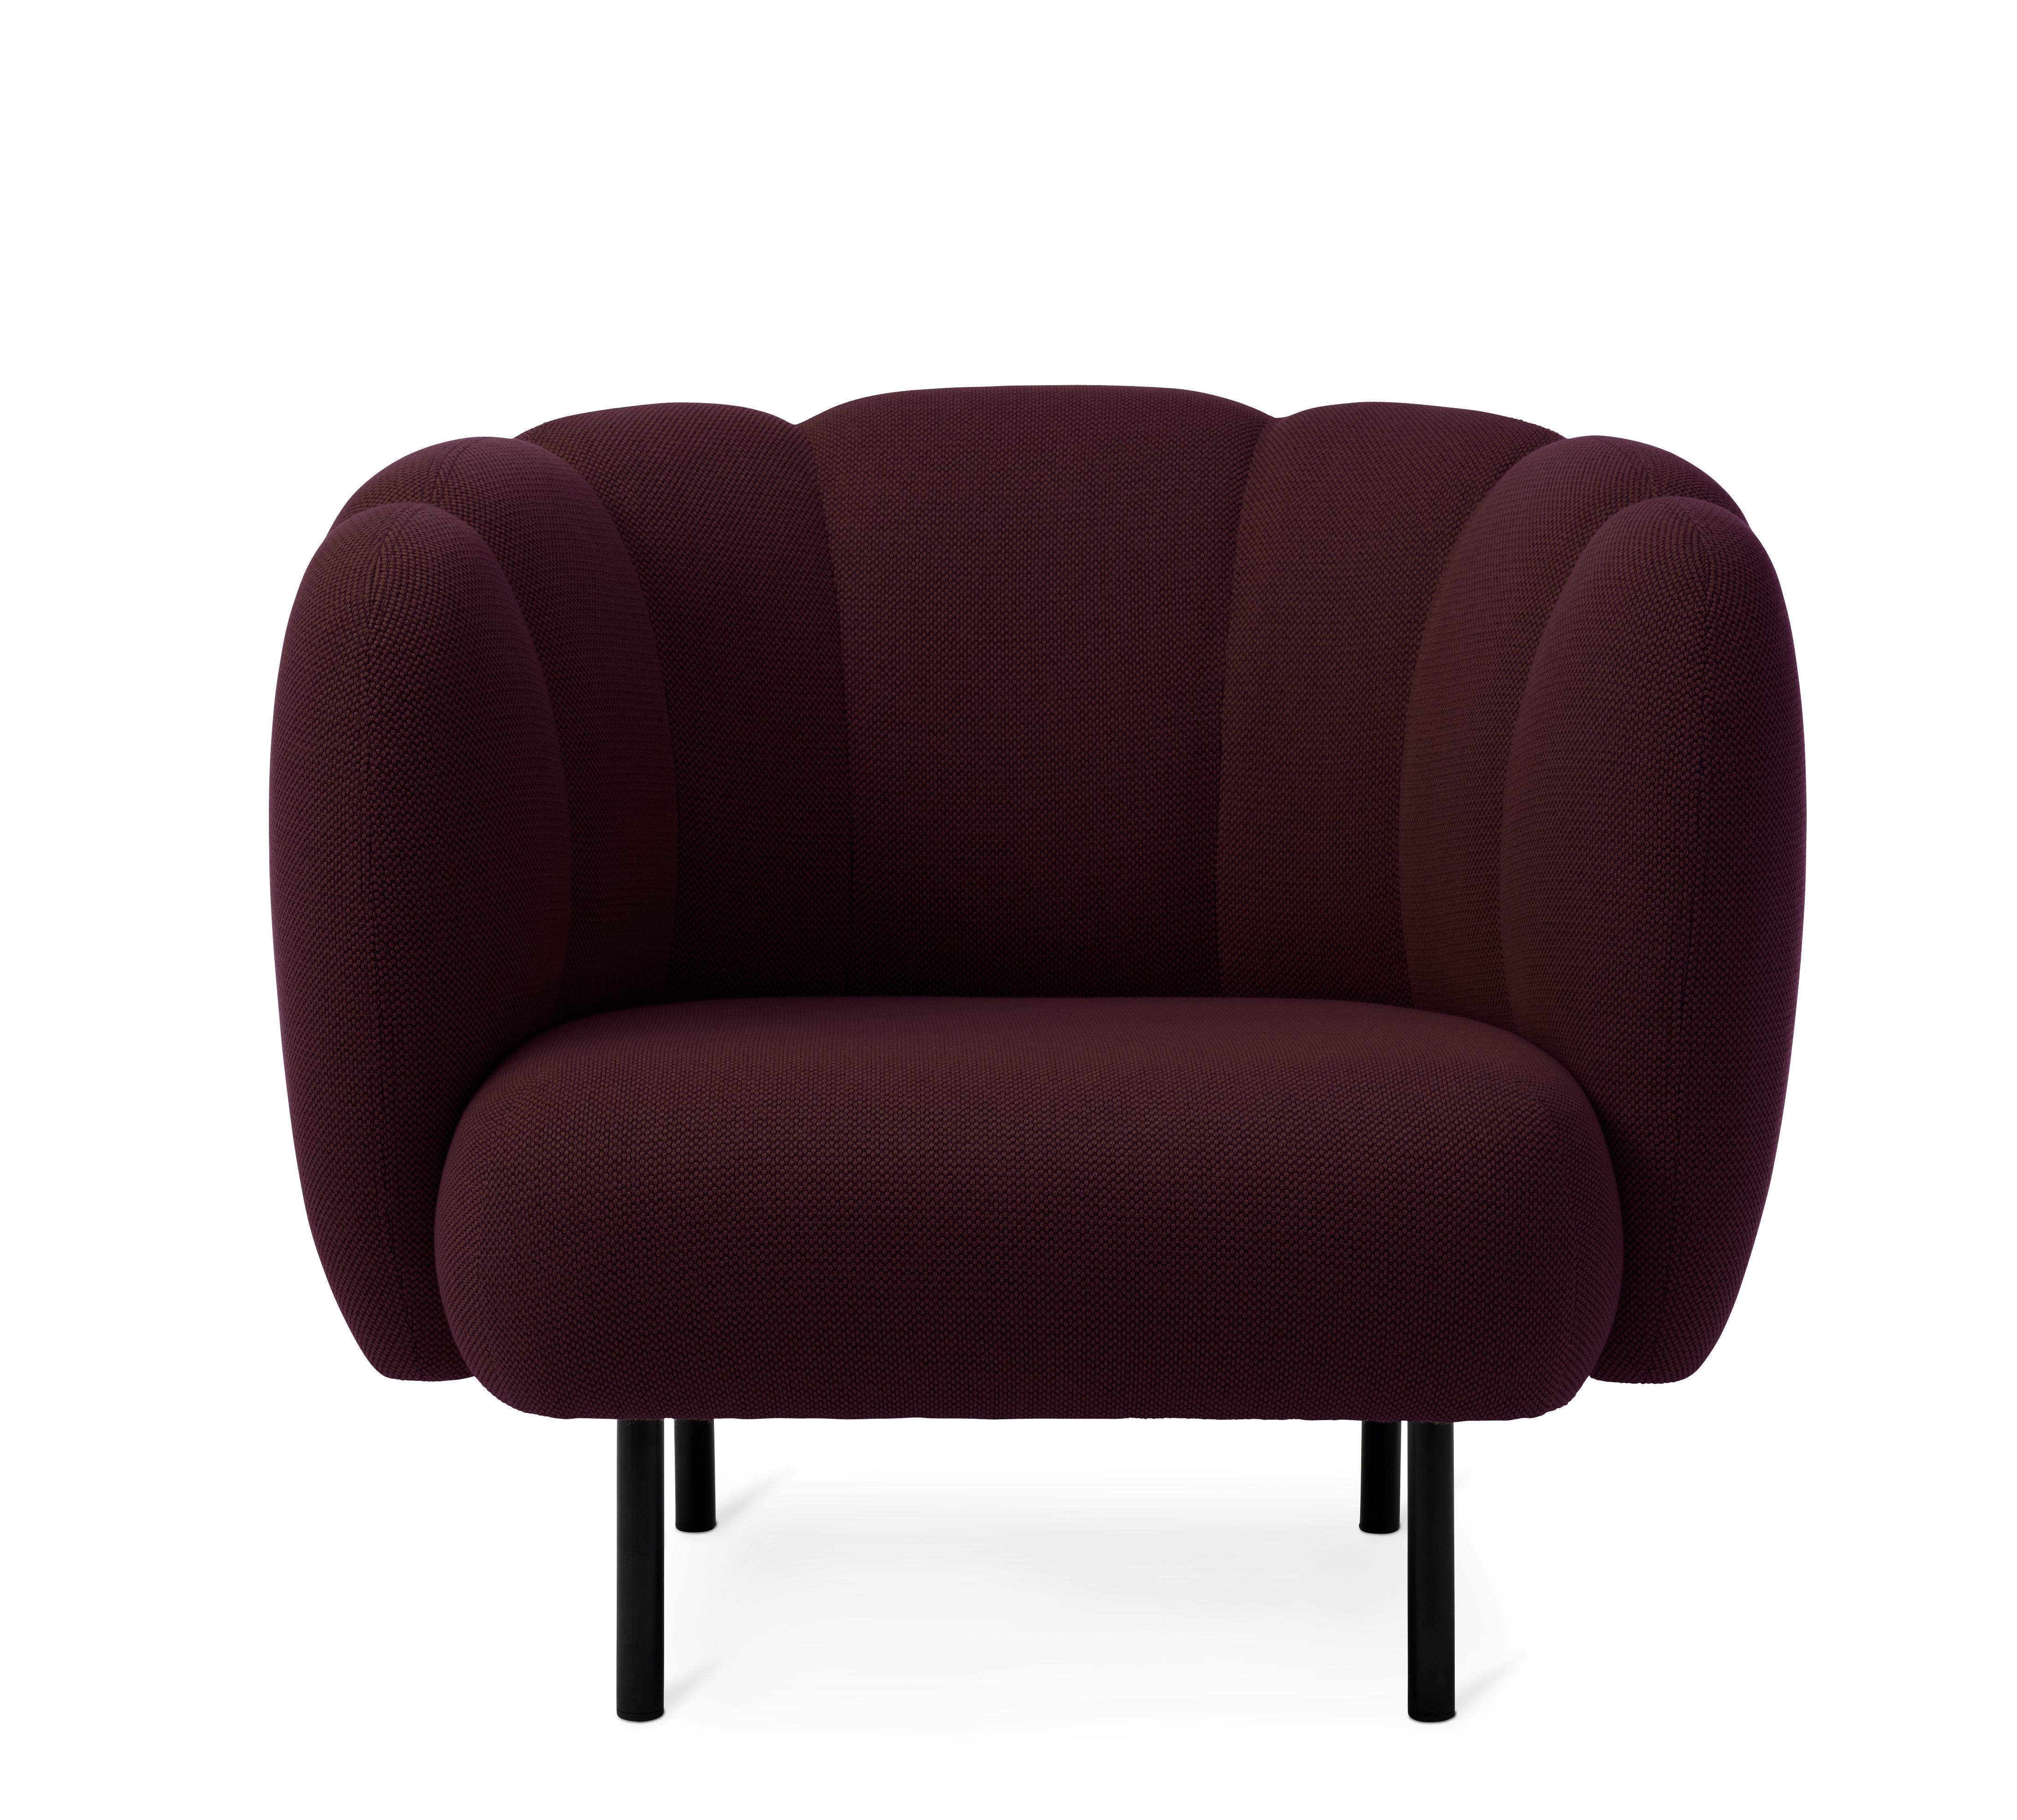 For Sale: Purple (Merit 040) Cape Lounge Chair with Stitches, by Charlotte Høncke from Warm Nordic